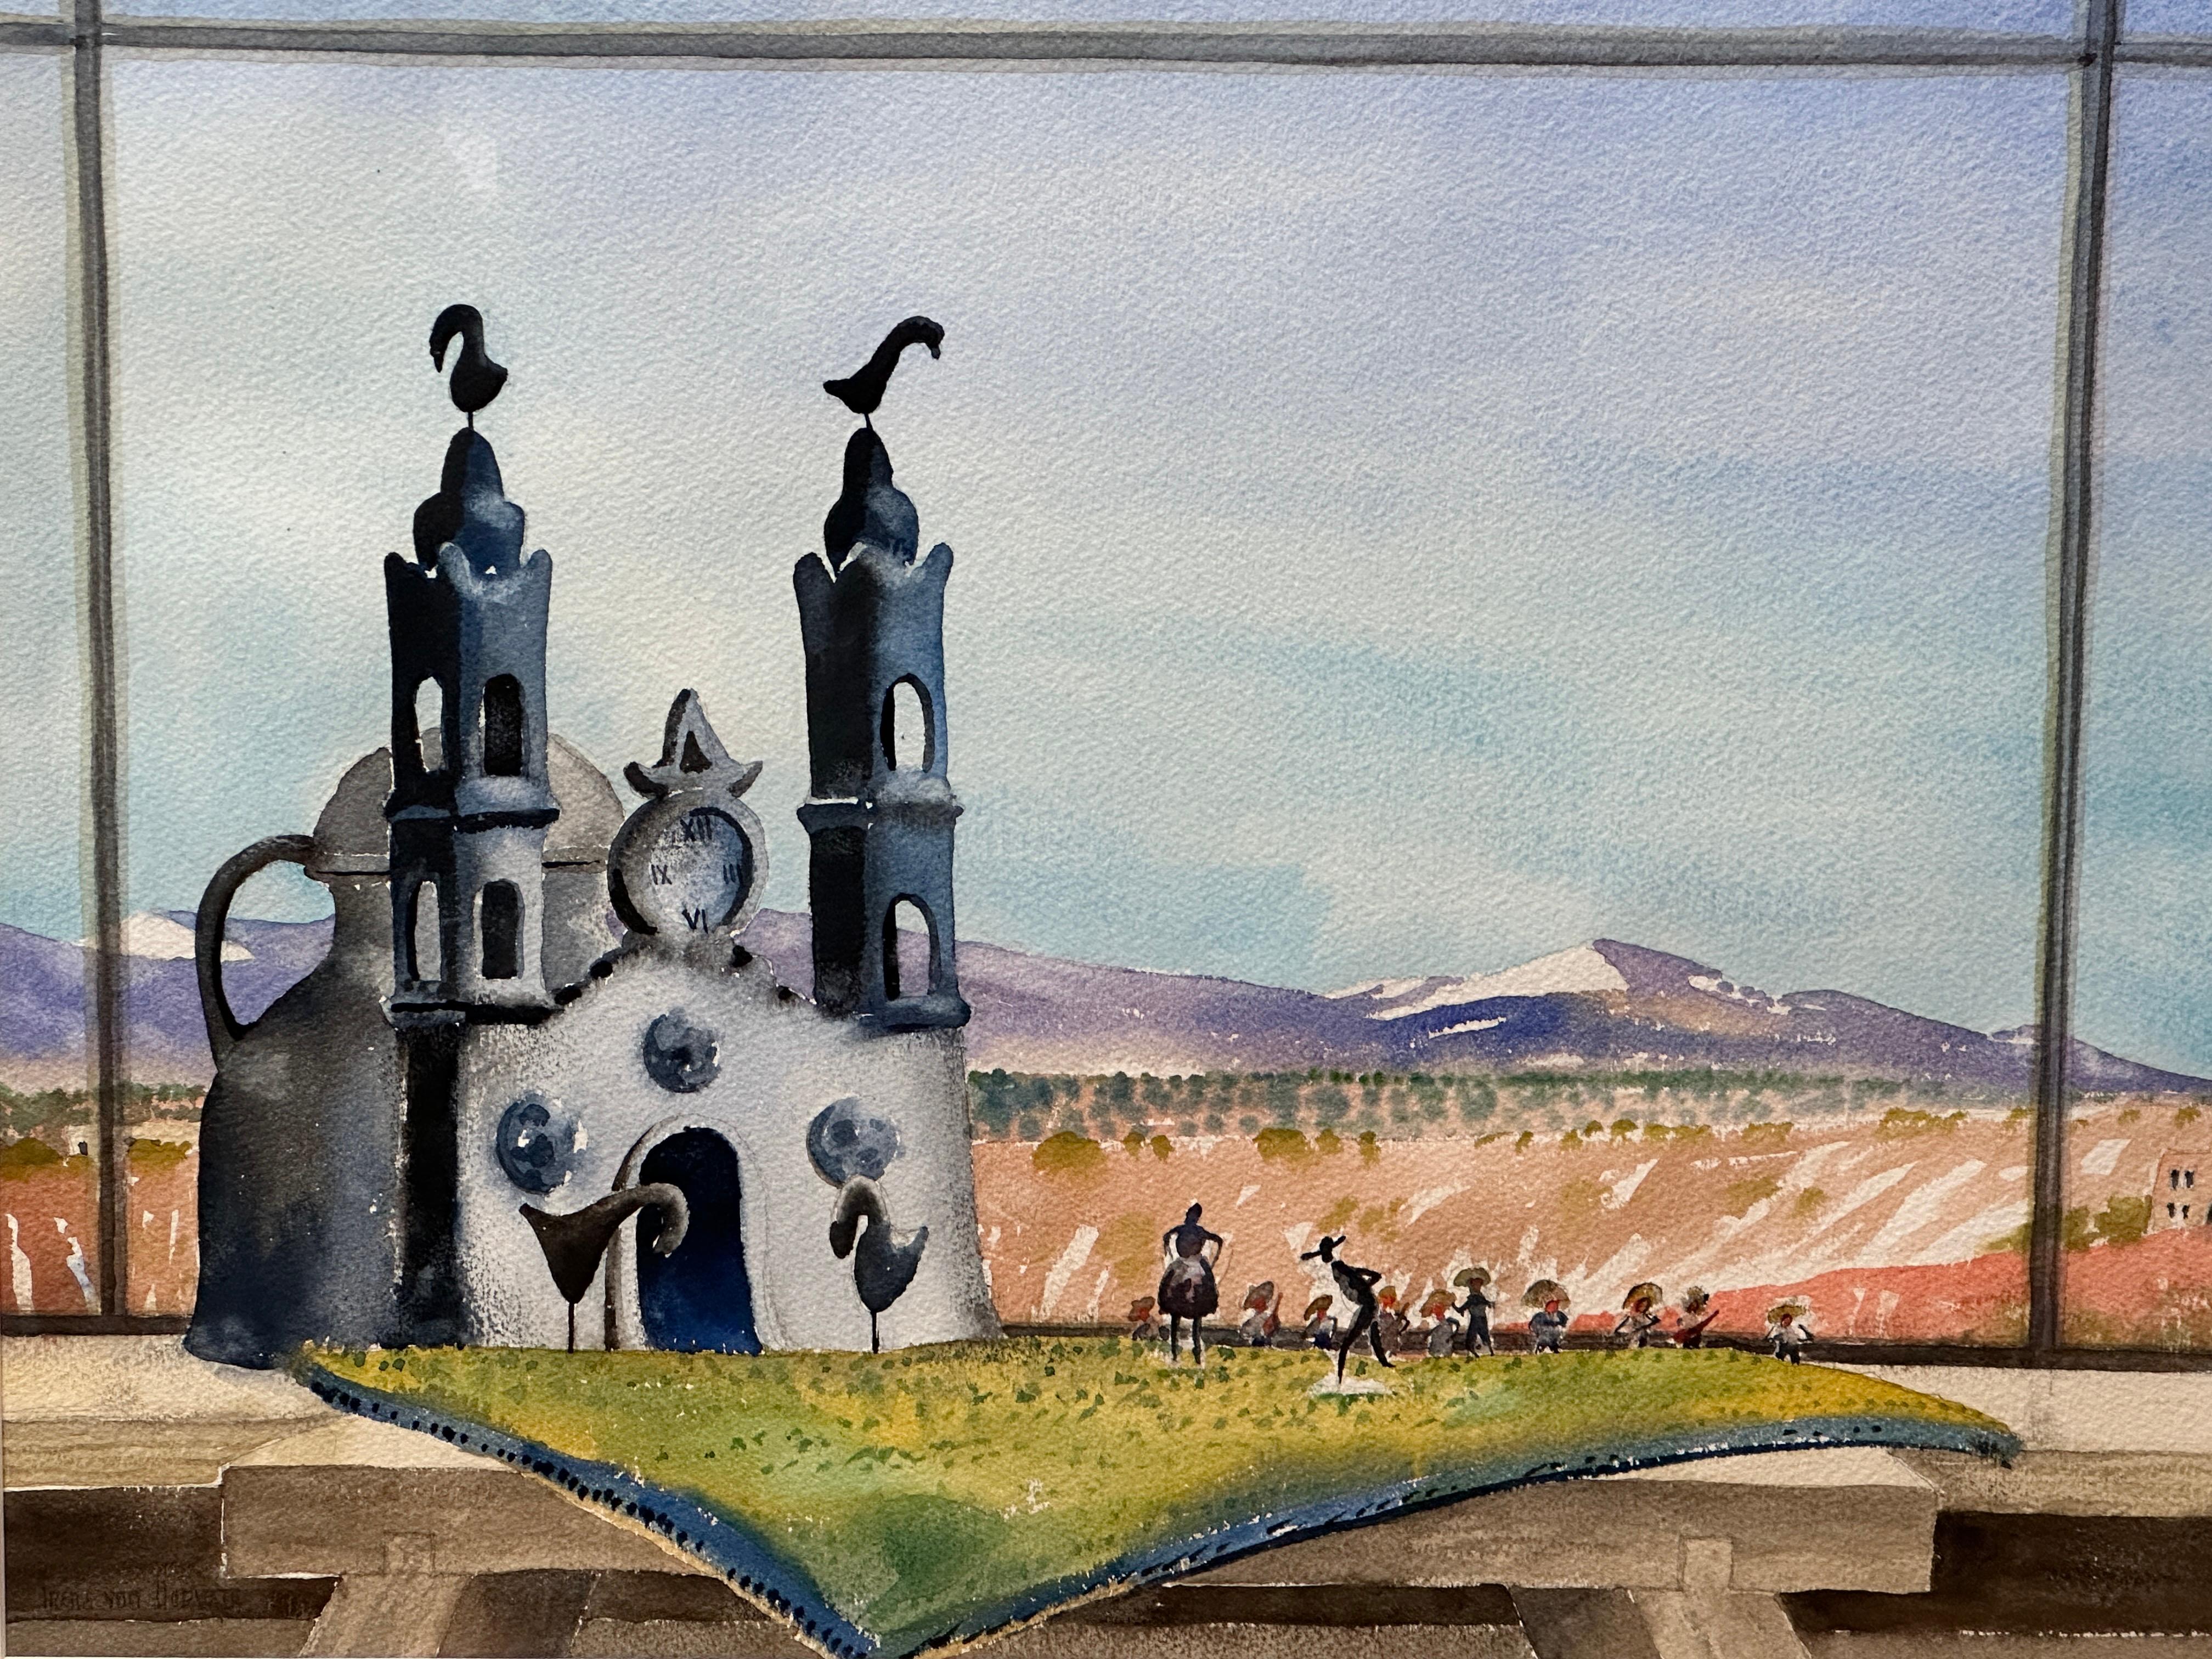 Lots of humor in this watercolor painted by a Mexican artist who unfortunately did not sign it. 
We enter in a fancy world. Be prepared!
Two trinkets featuring, the first one, an imaginary church with 4 big threatening birds standing guard, two on